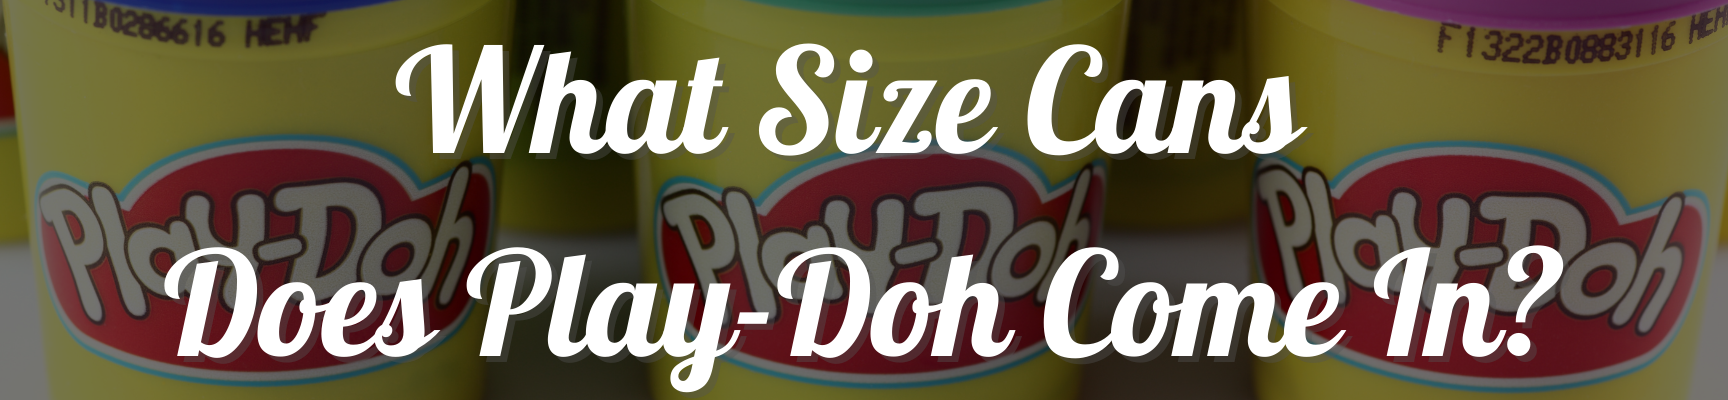 What Size Cans Does Play-Doh Come In